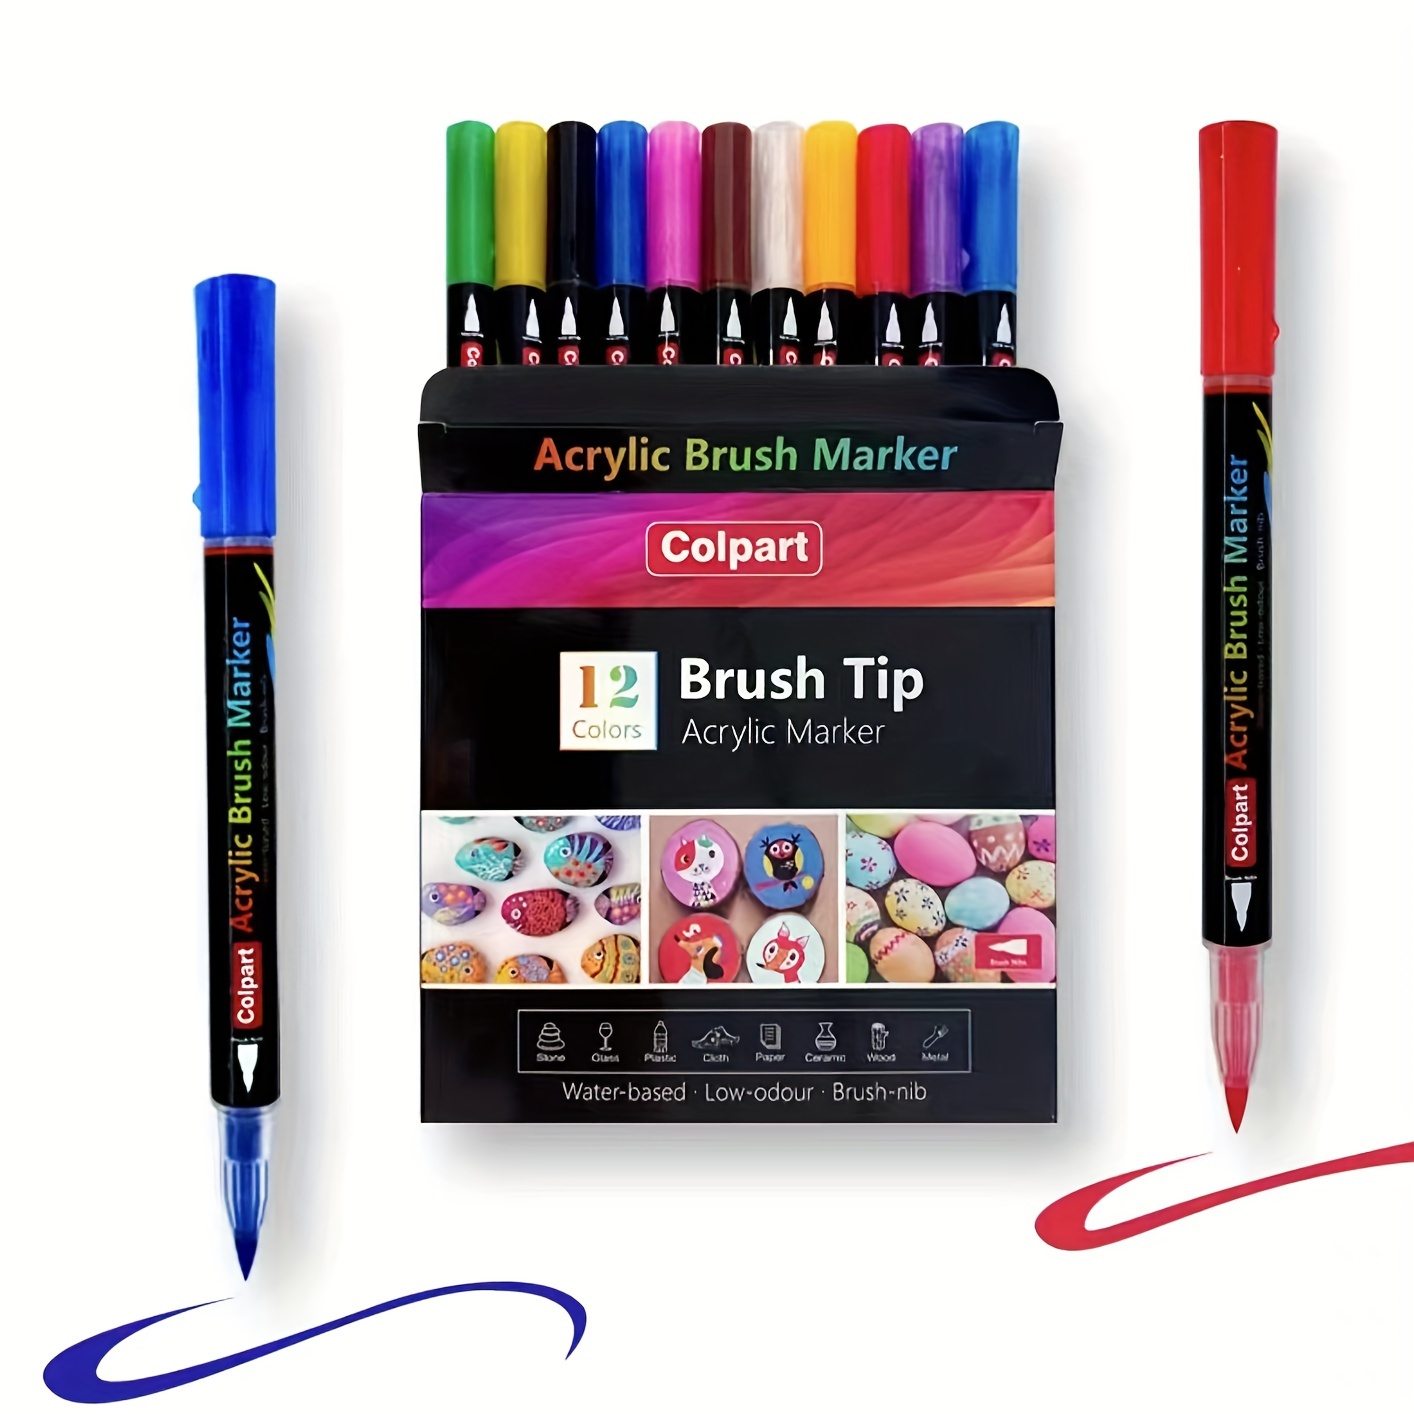  colpart Brush Tip Acrylic Paint Pens-36 Colors Acrylic